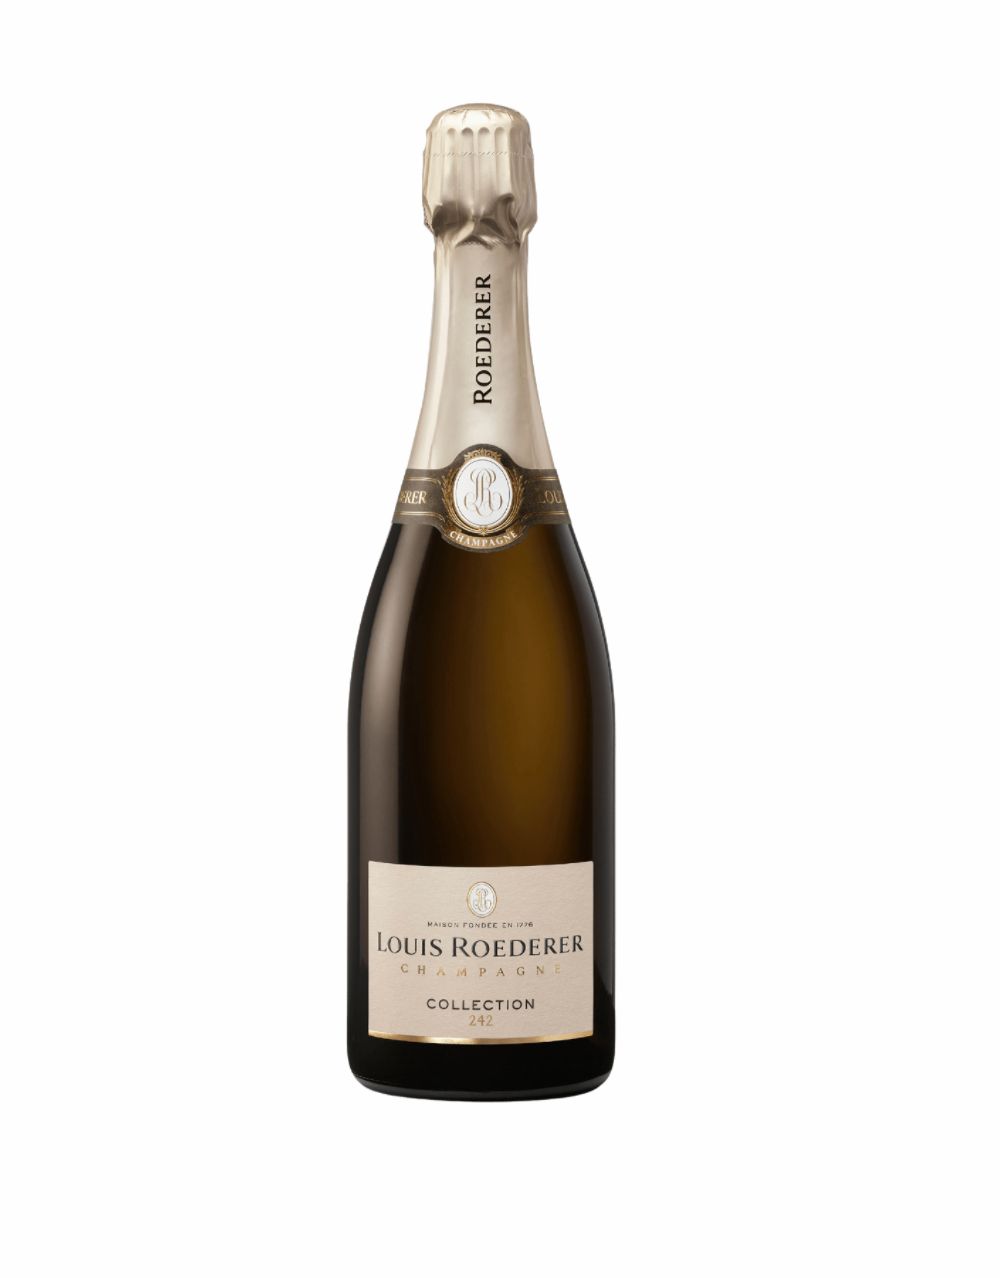 Champagne Louis Roederer Collection 242 | ReserveBar